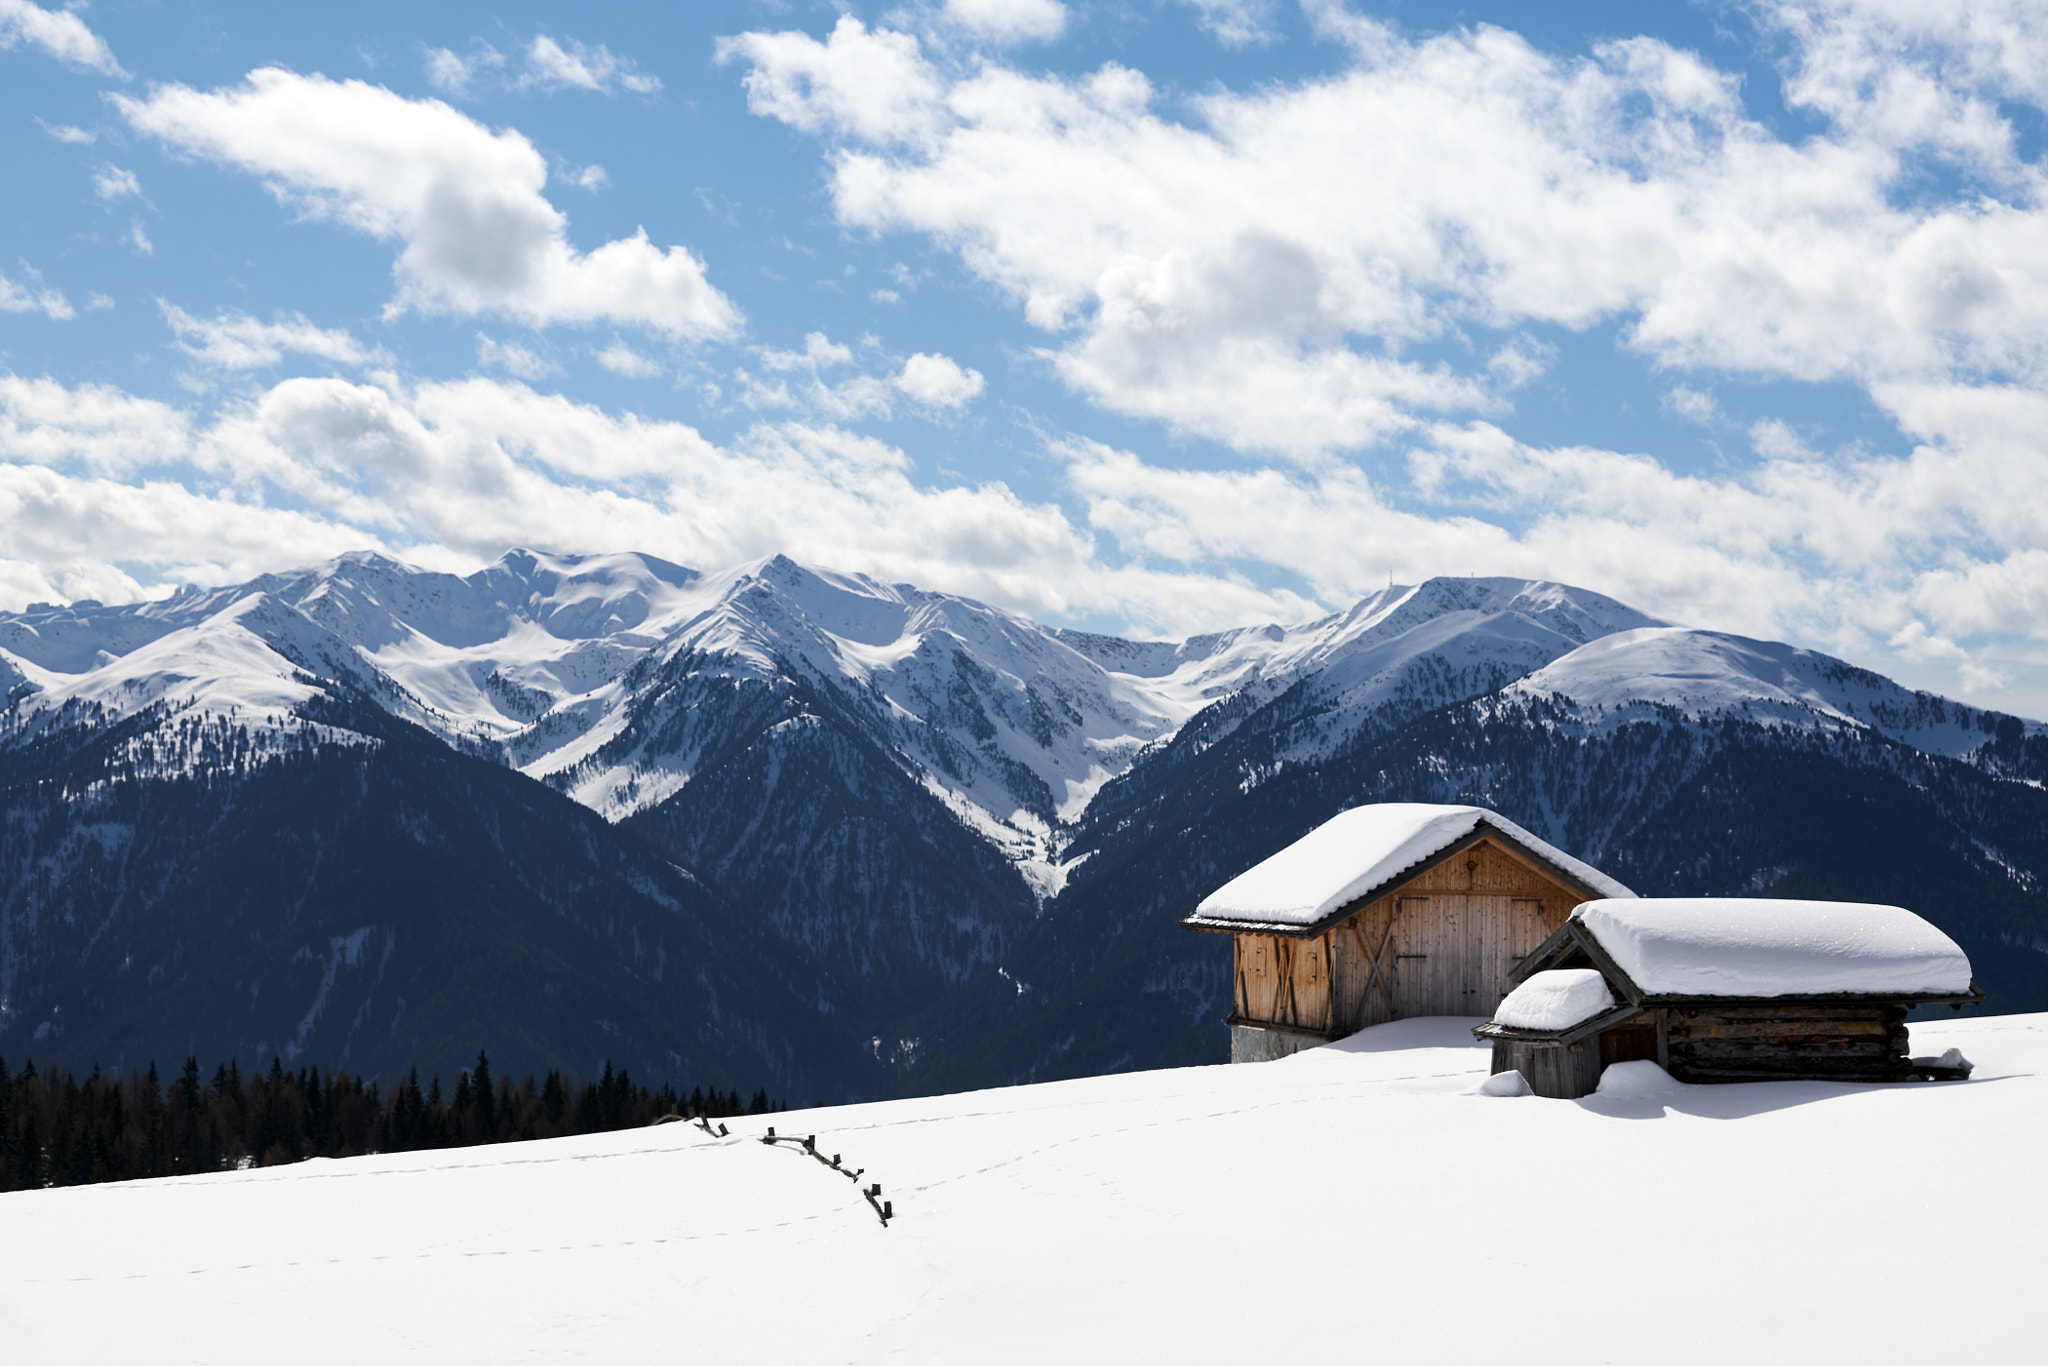 Sony a99 II + Sony 70-200mm F2.8 G sample photo. Two huts on rodenegger alm photography